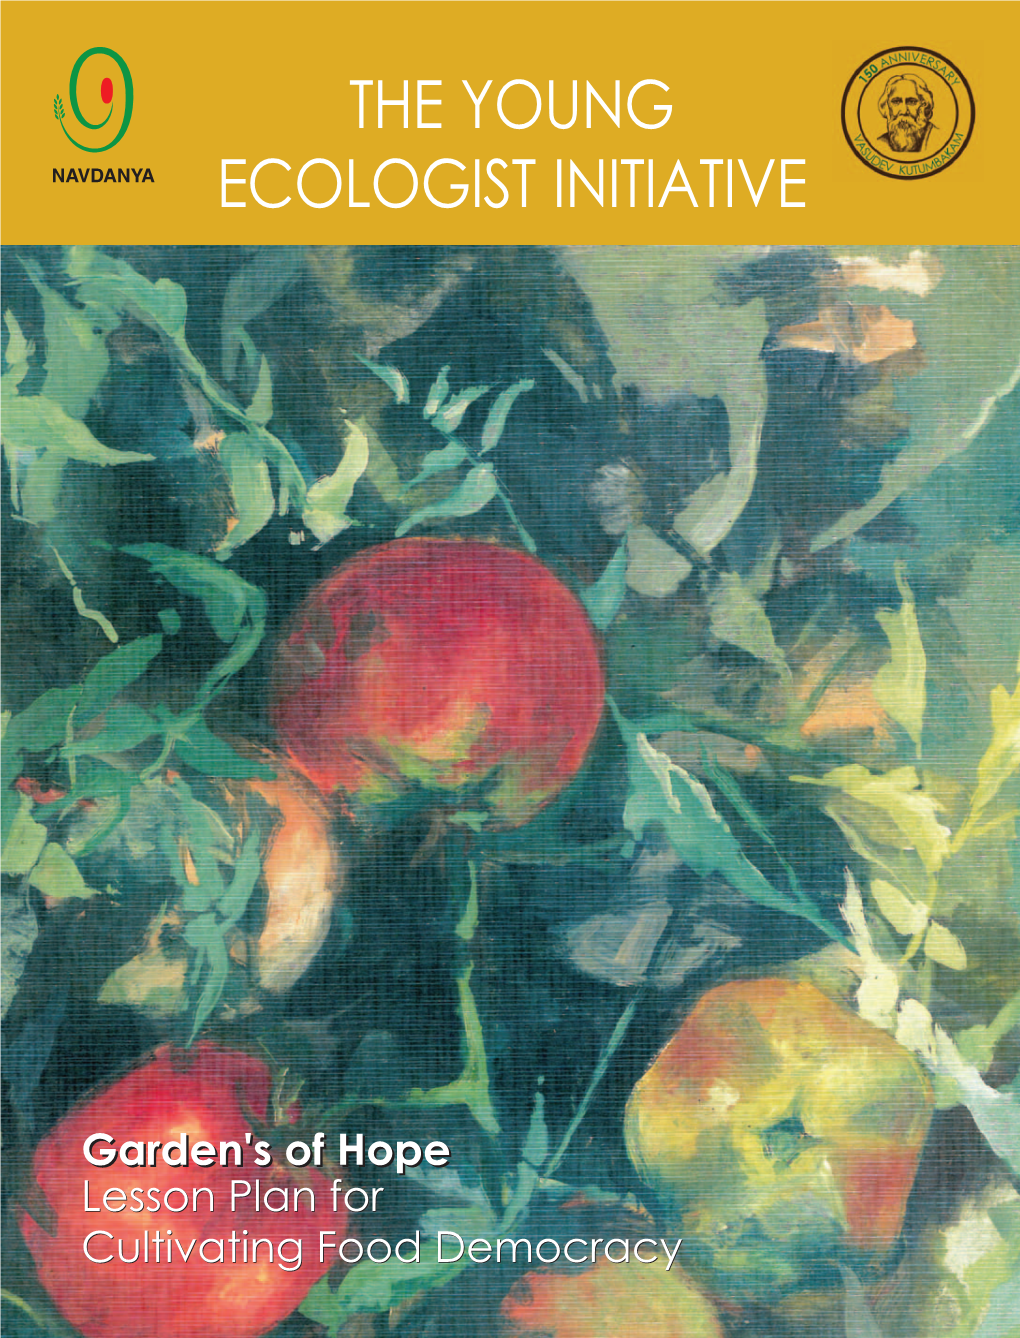 The Young Ecologist Initiative